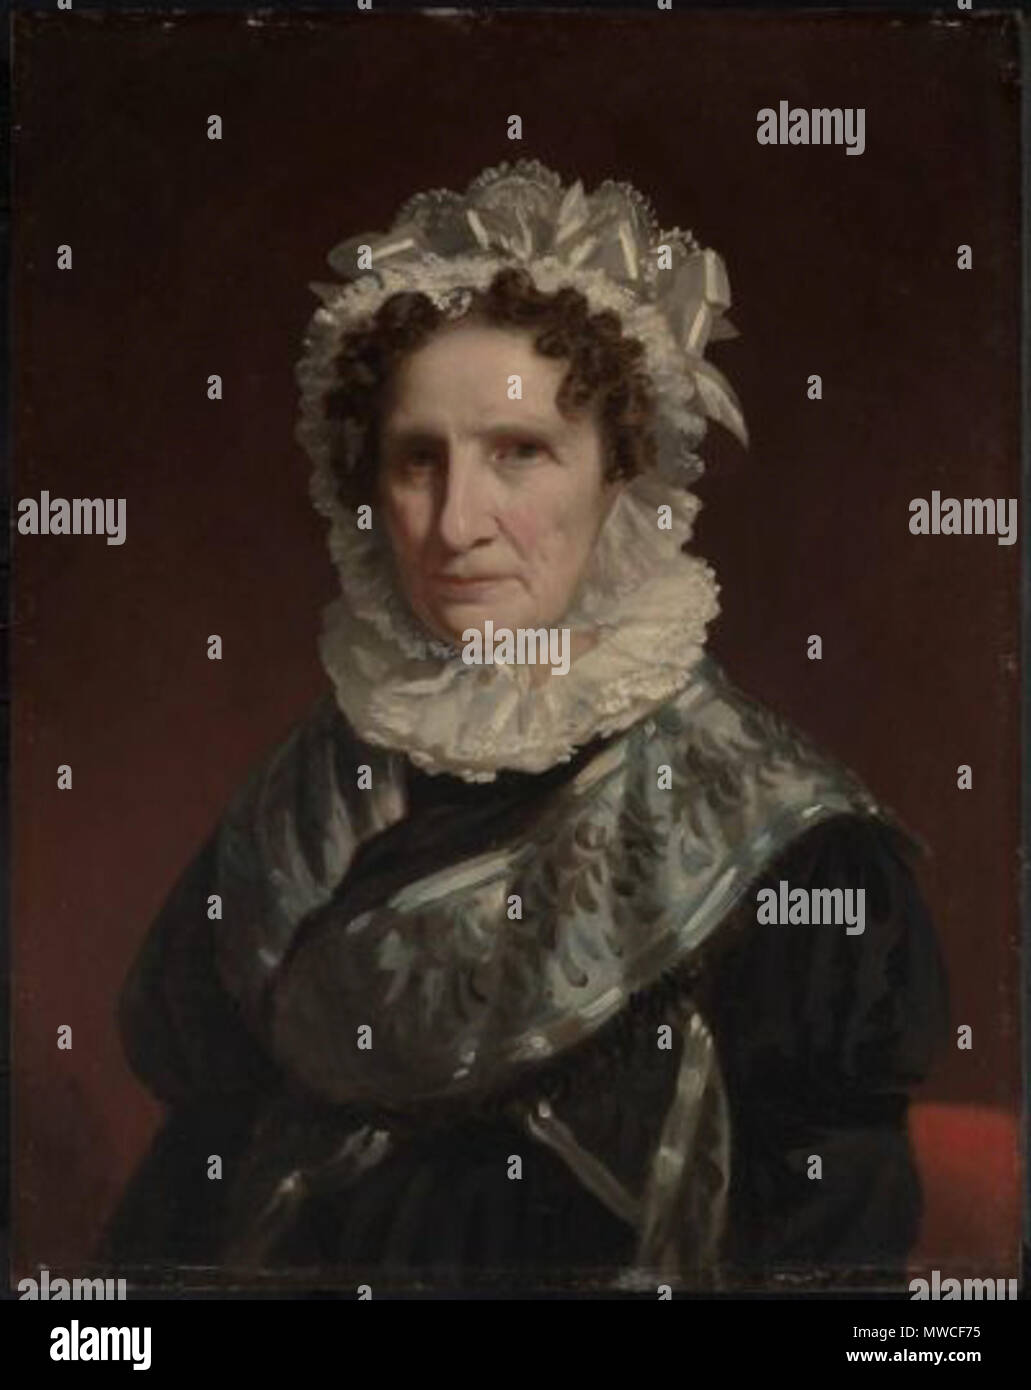 . Madam Powel (Elizabeth Willing). about 1825. By Francis Alexander, American, 1800–1880. 76.52 x 60.32 cm (30 1/8 x 23 3/4 in.). Oil on panel. Museum of Fine Arts, Boston. 1825.   Francis Alexander  (1800–1880)     Description American painter  Date of birth/death 3 February 1800 27 March 1880  Location of birth/death Killingly Florence  Authority control  : Q5479973 VIAF: 44154388 ISNI: 0000 0000 6706 3648 ULAN: 500001550 LCCN: nr91025186 GND: 171958527 WorldCat 184 ElizabethWilling ca1825 byFrancisAlexander MFABoston Stock Photo